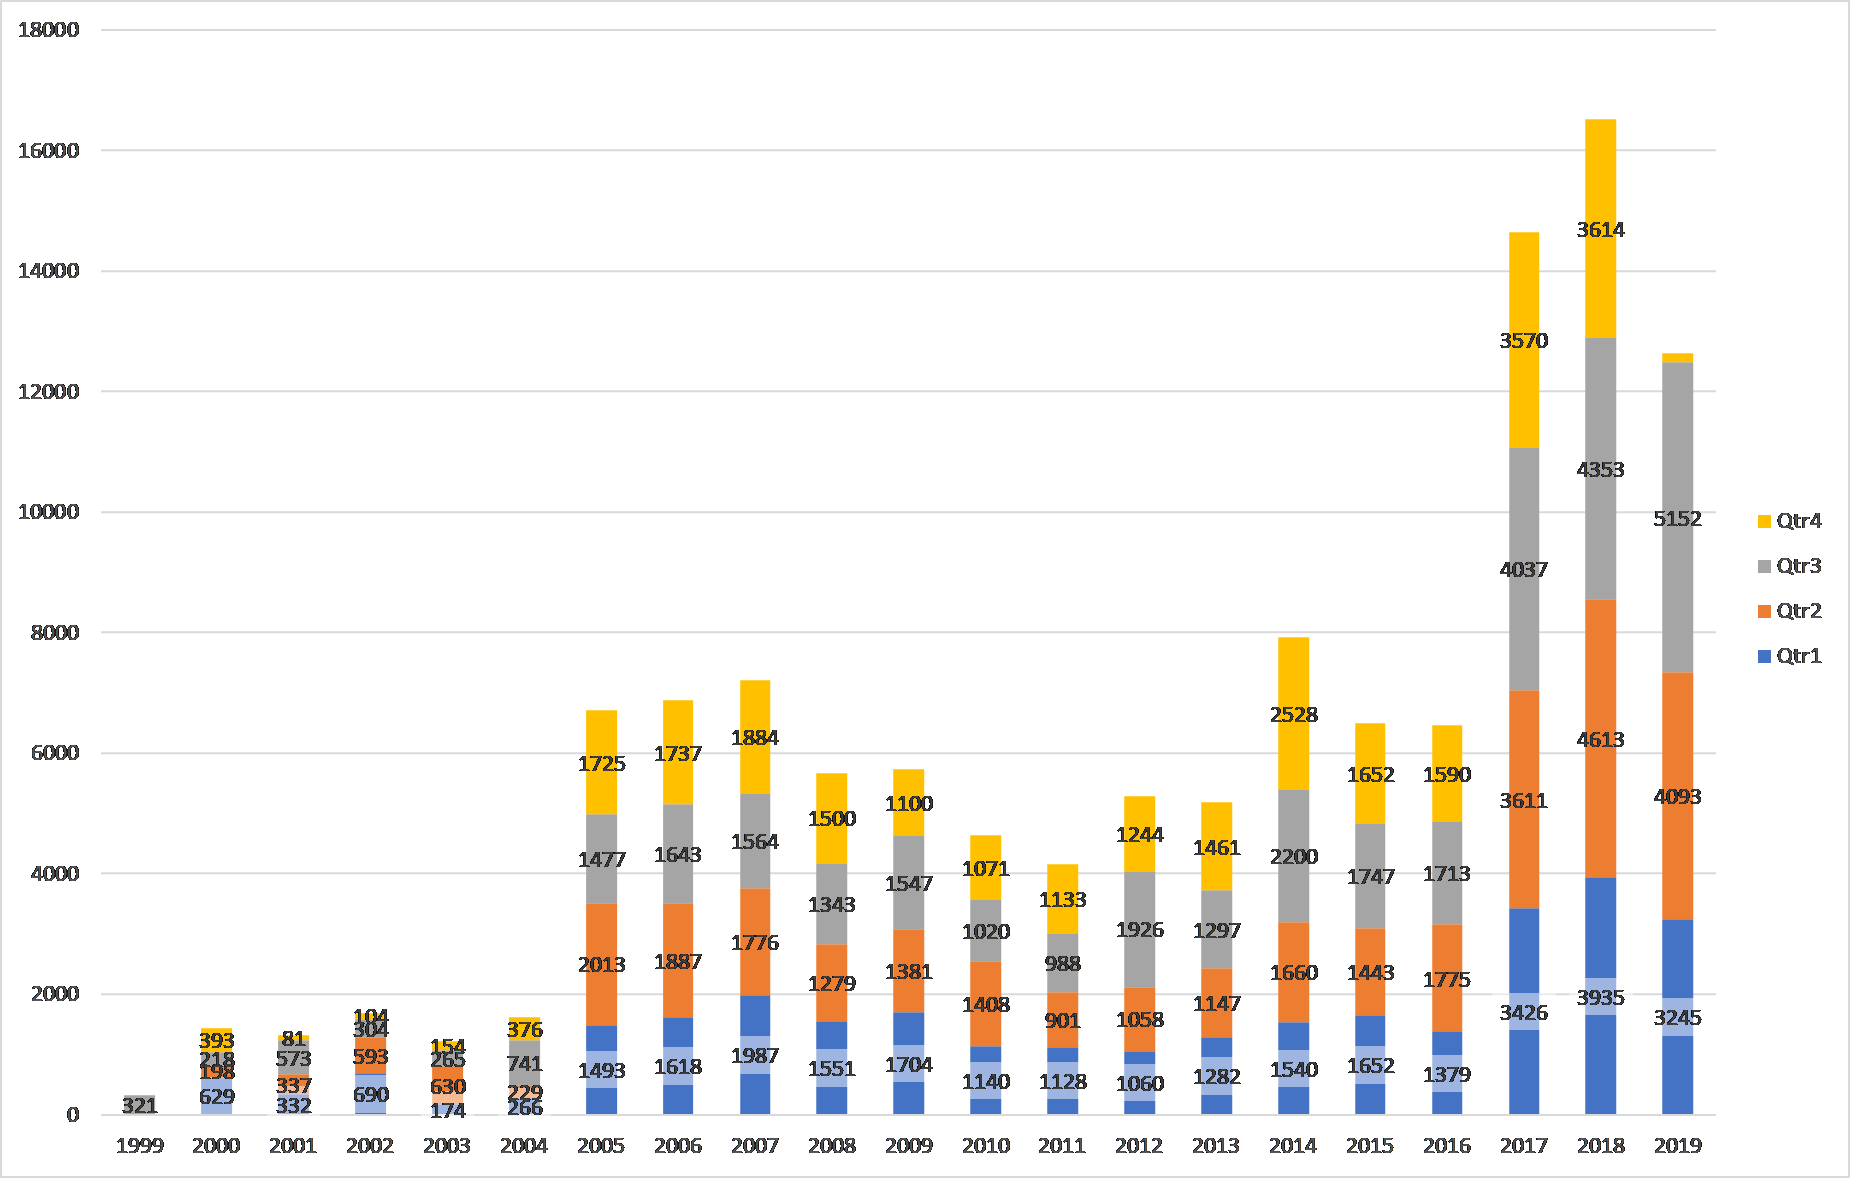 Comparison of Populated CVE Entries by Year for All Quarters - CYQ32019